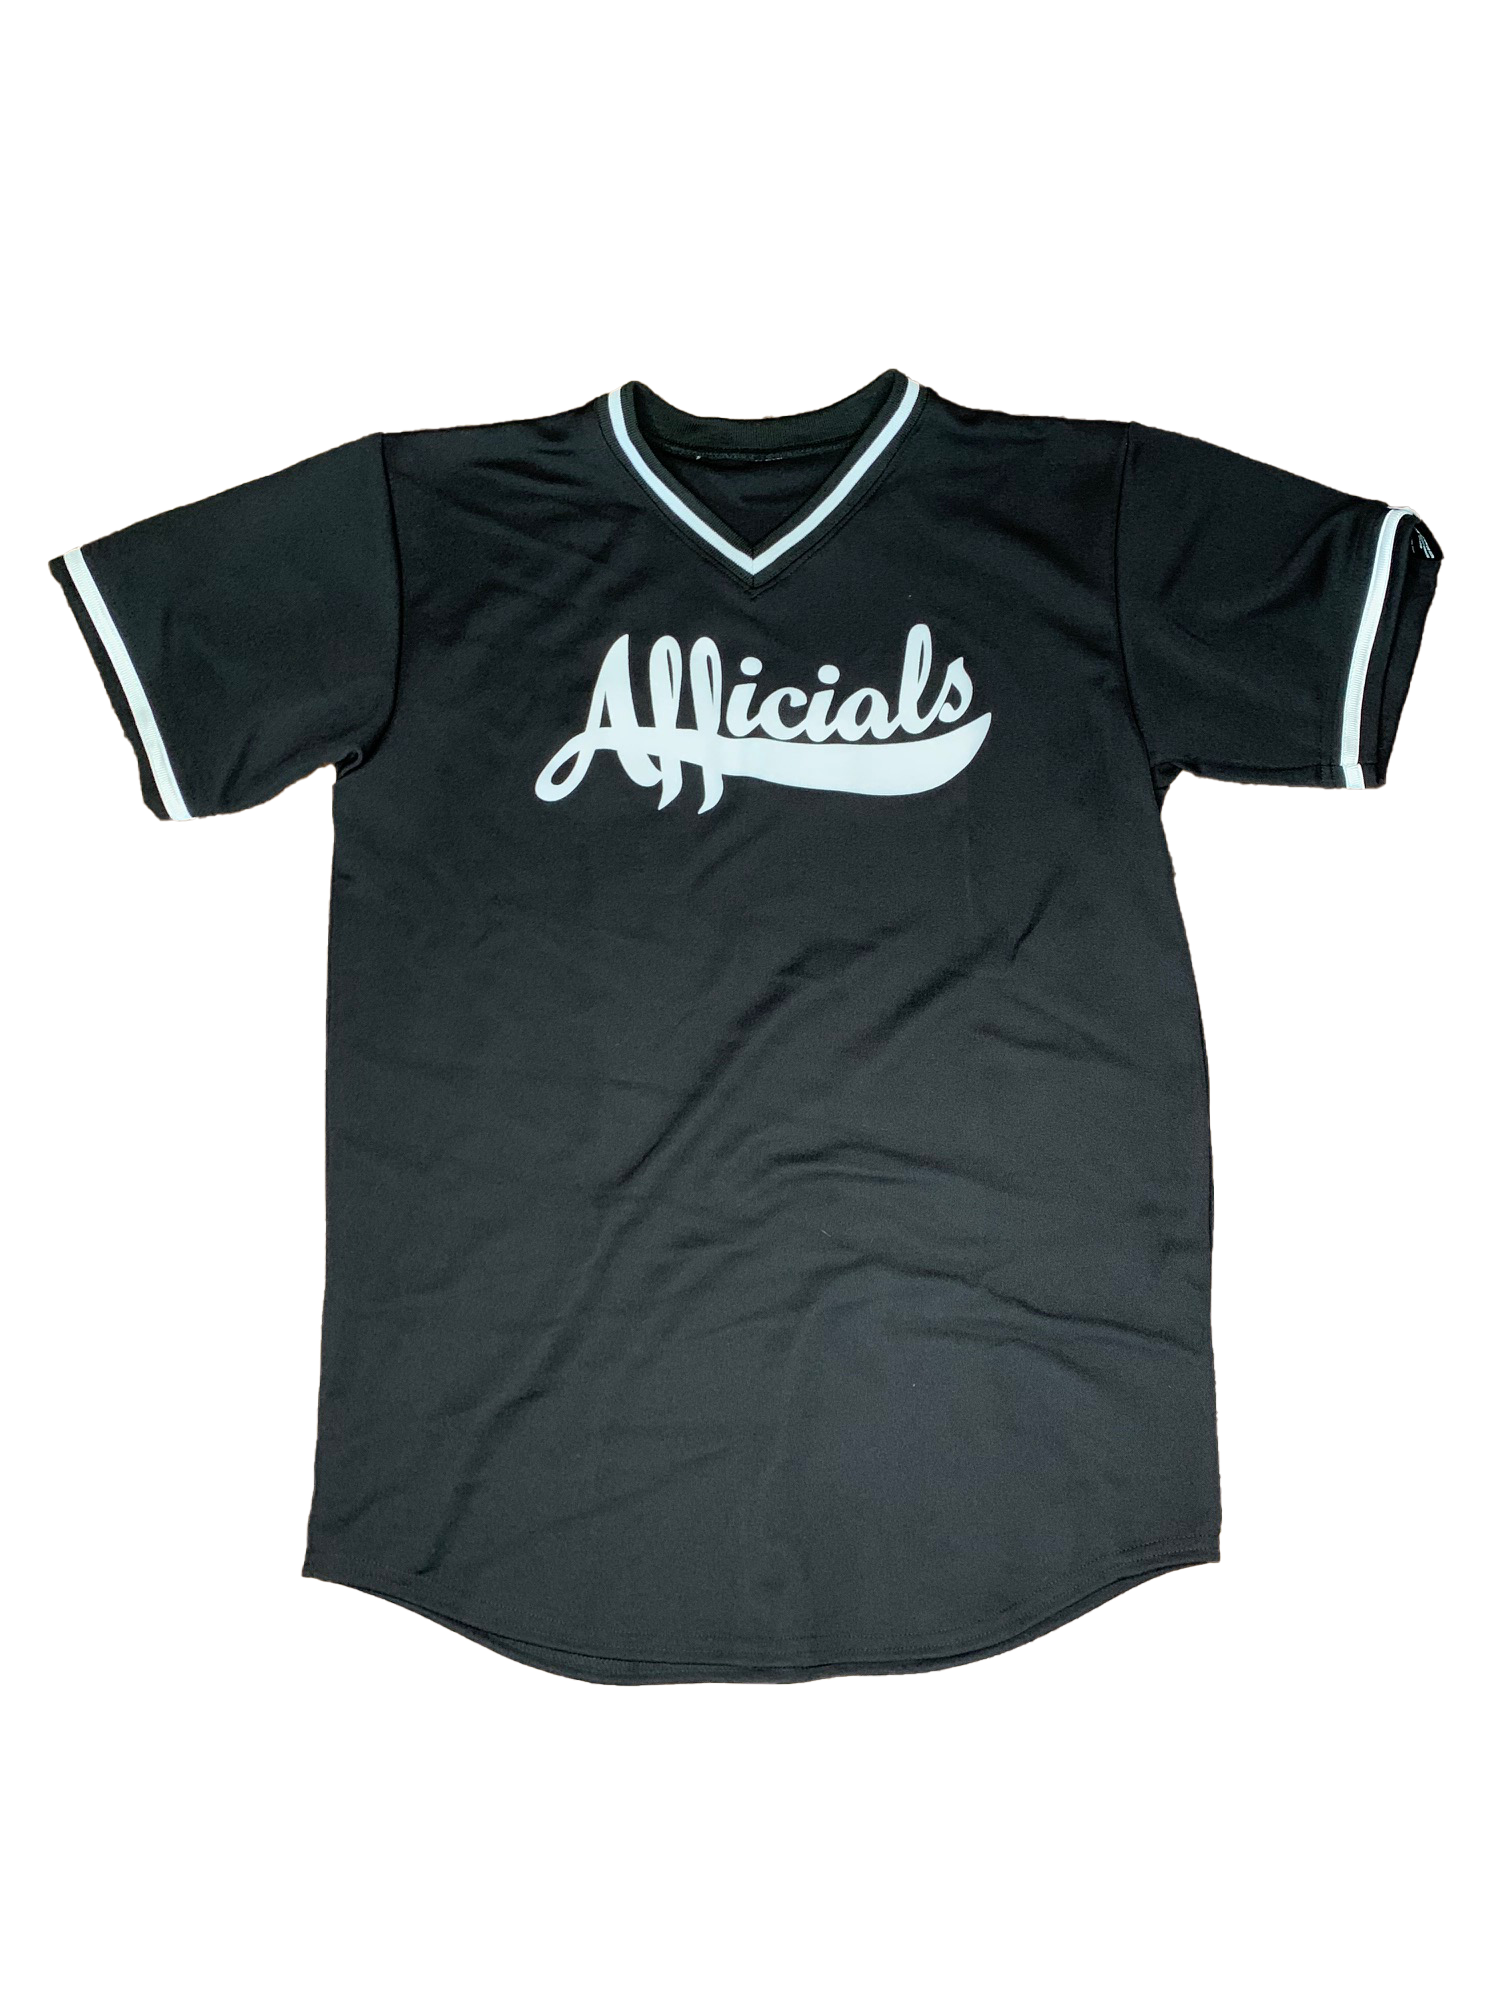 Afficials Signature Baseball Jersey BLACK/WHITE – Afficials THE LABEL ™